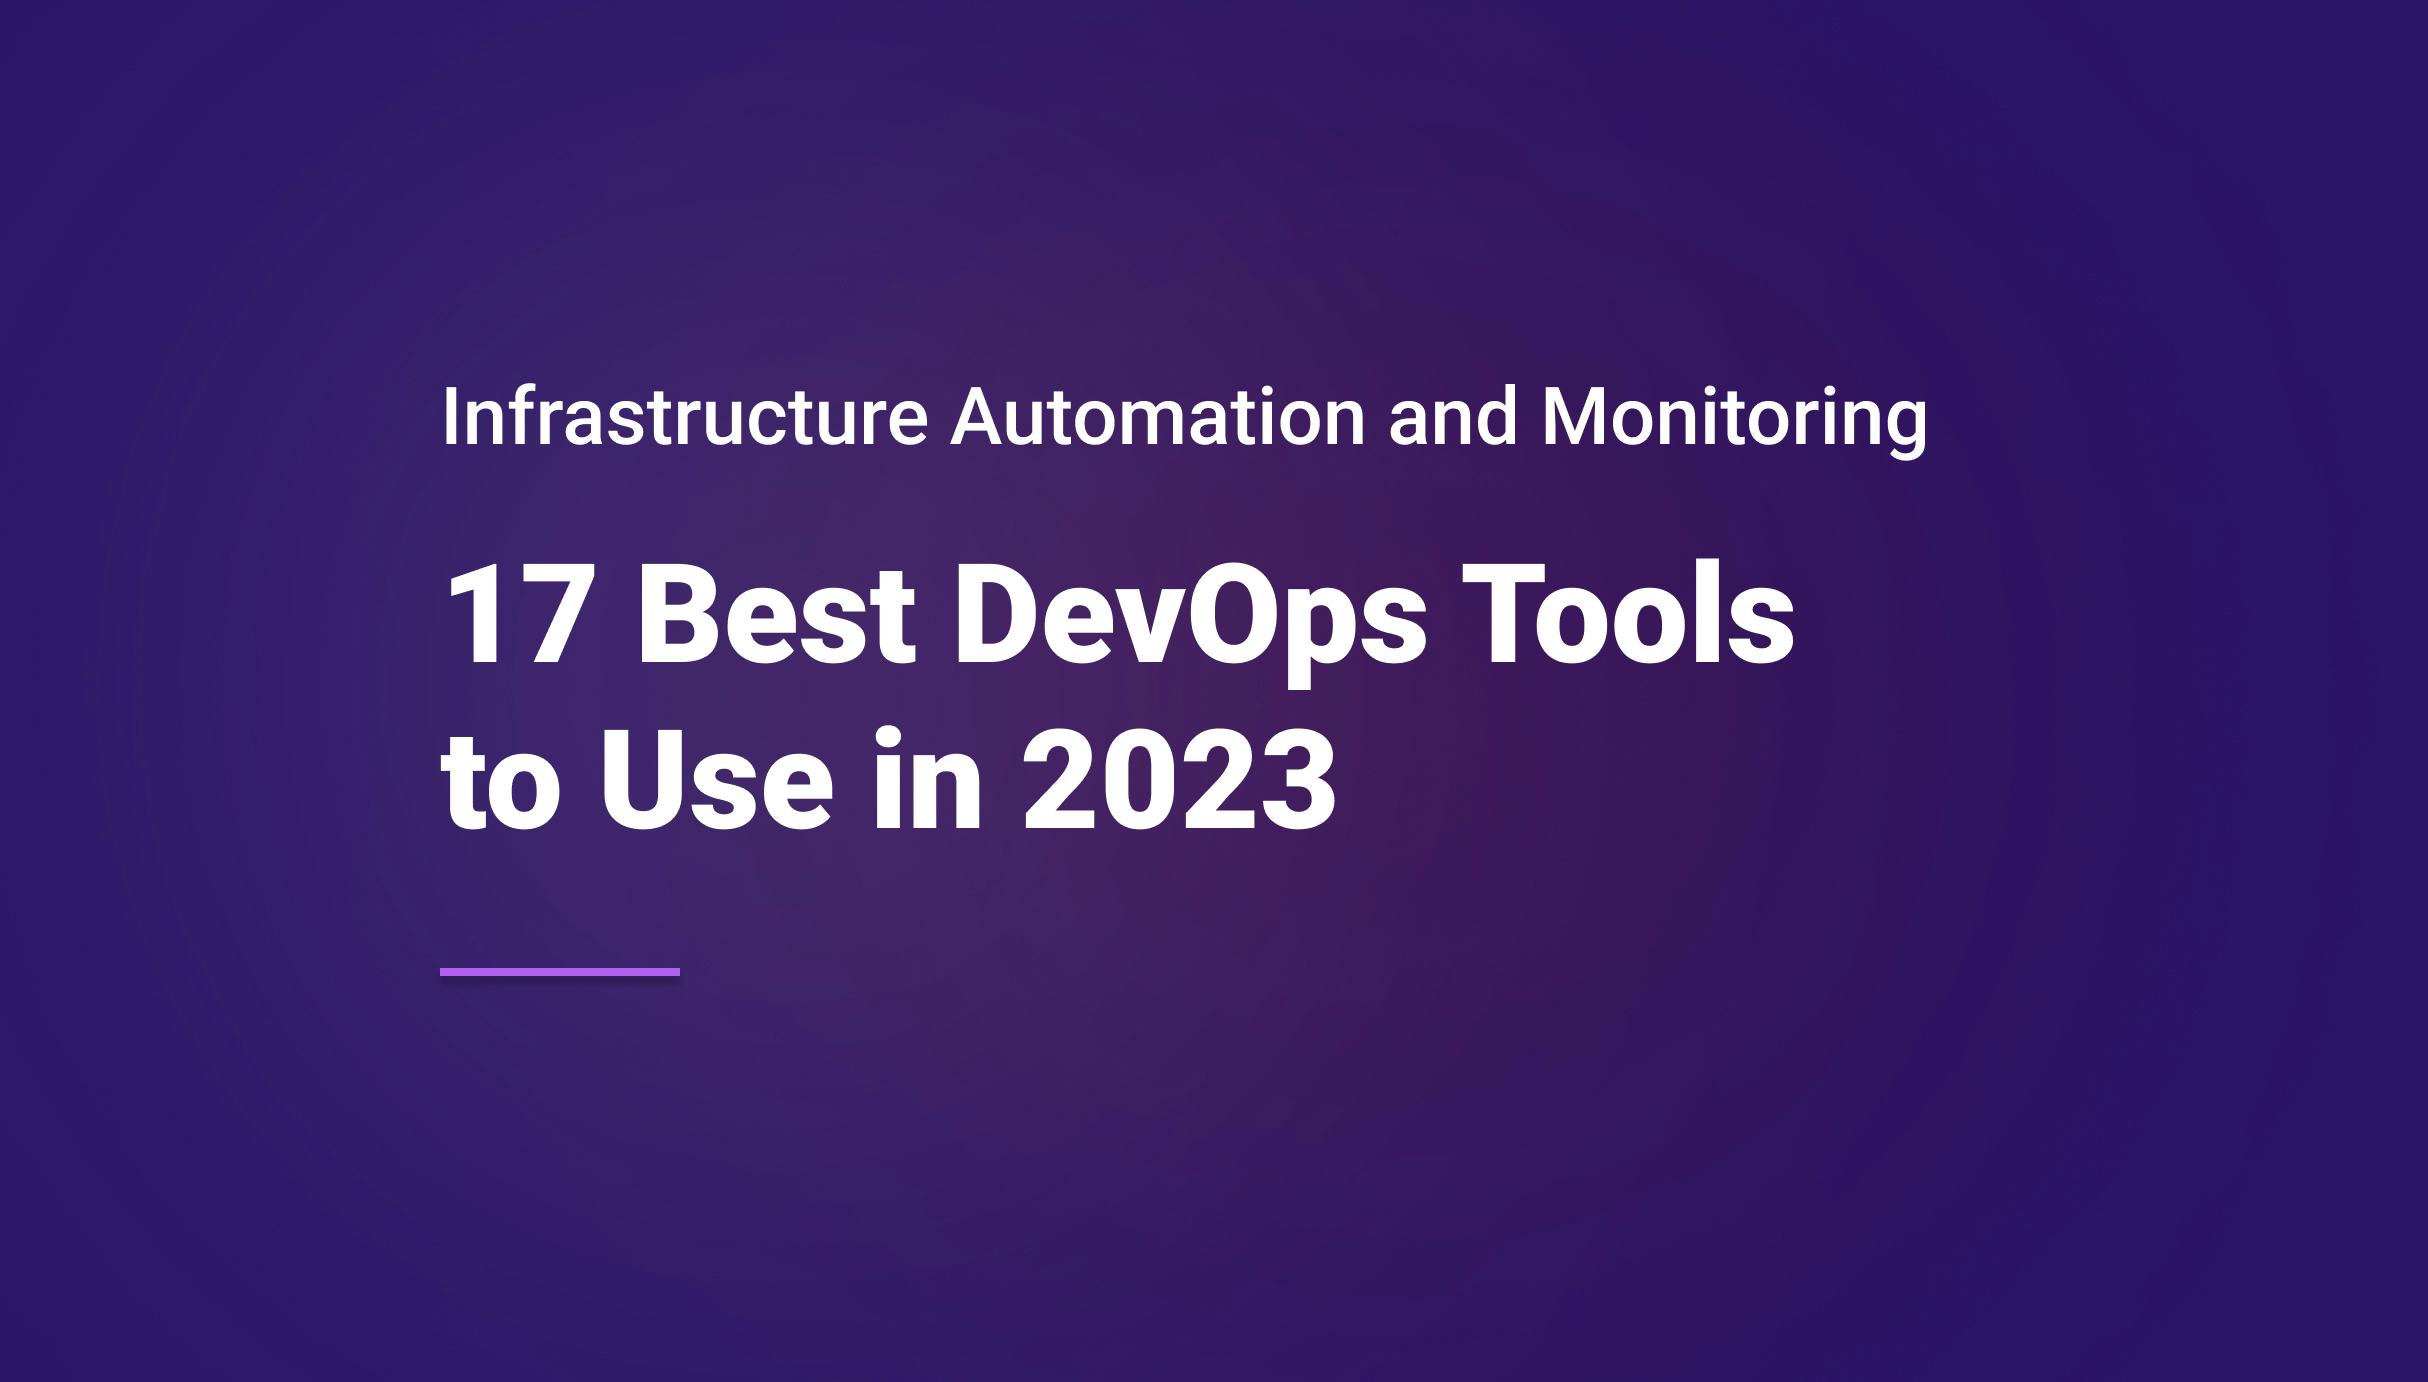 17 Best DevOps Tools to Use in 2023 for Infrastructure Automation and Monitoring